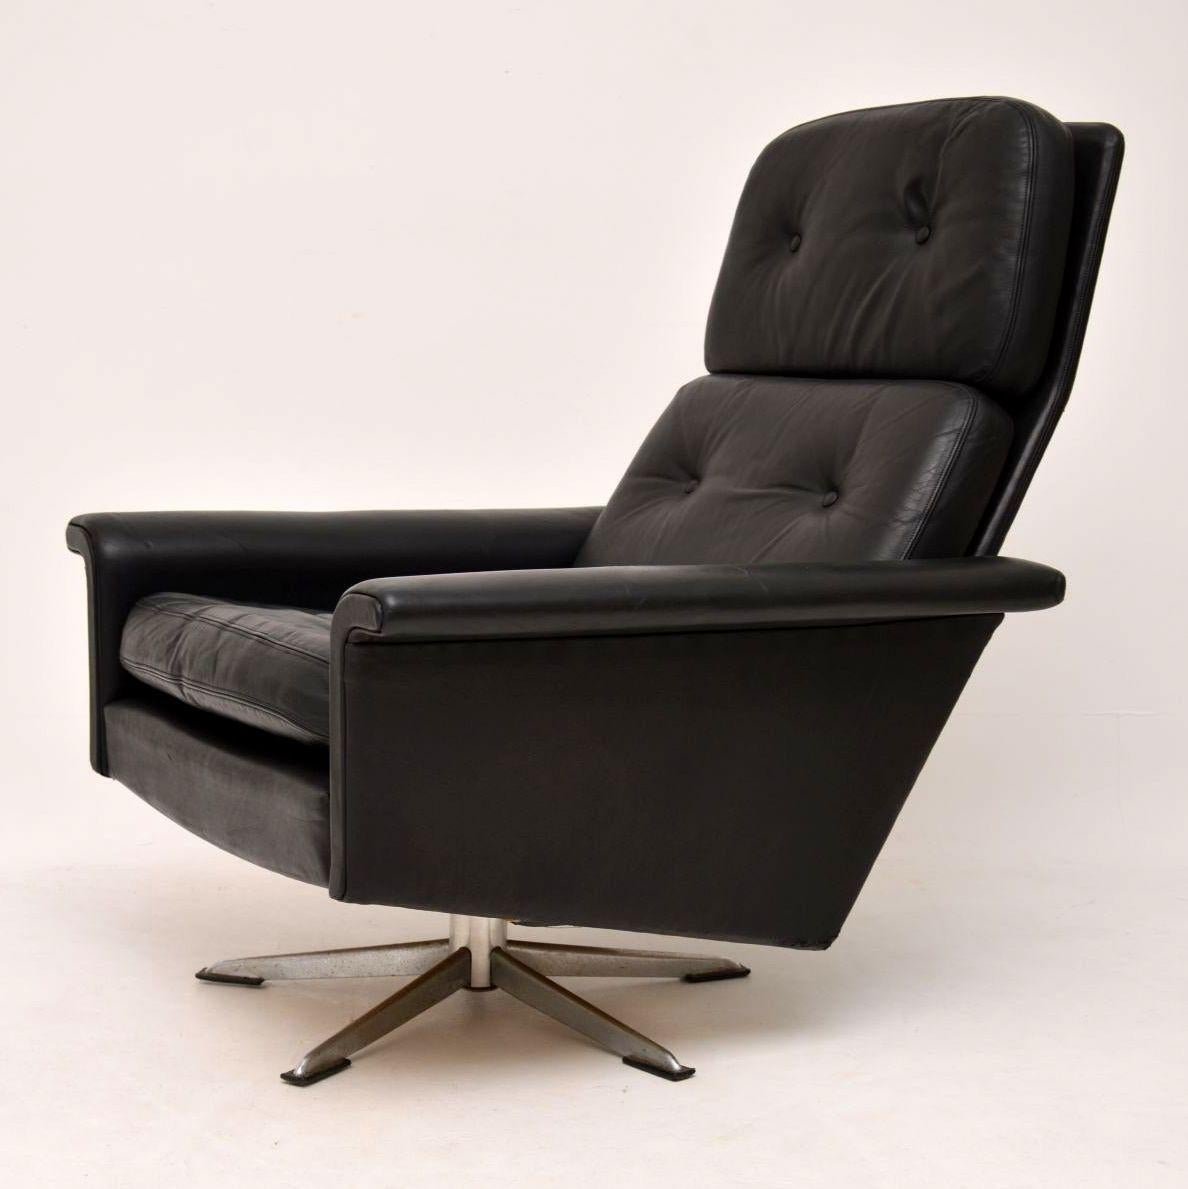 A stylish and extremely comfortable vintage Danish leather swivel armchair, this dates from the 1960s-1970s. I saw some literature a while back showing that this is a rare model by Johannes Andersen, which makes sense as the quality is far higher